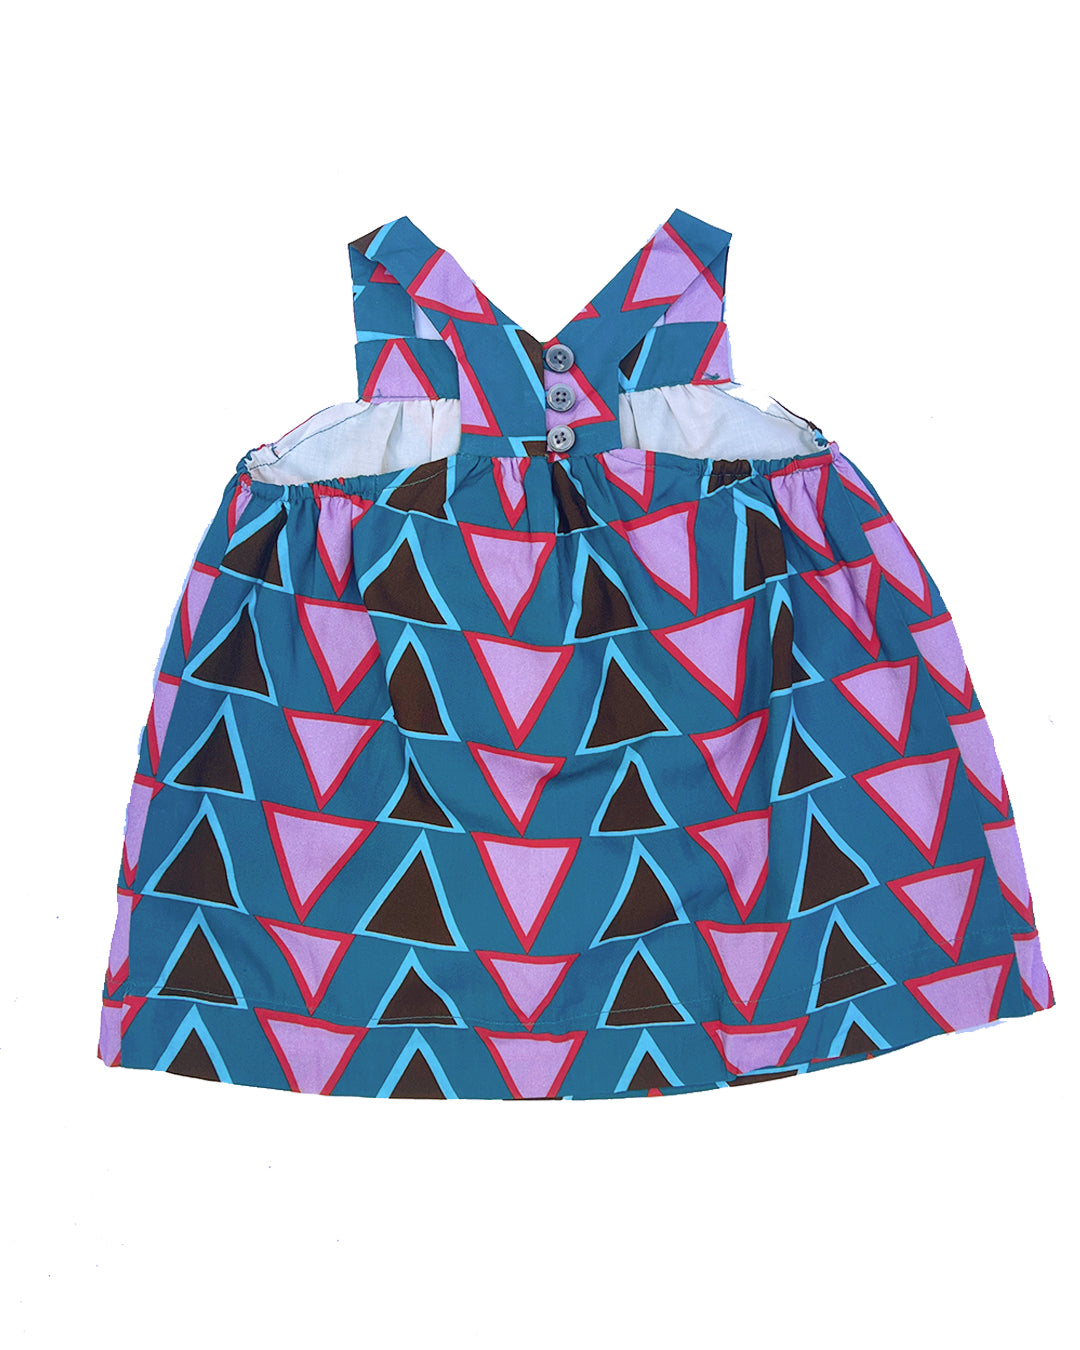 Stacked Triangles Baby Dress | cukimber designs